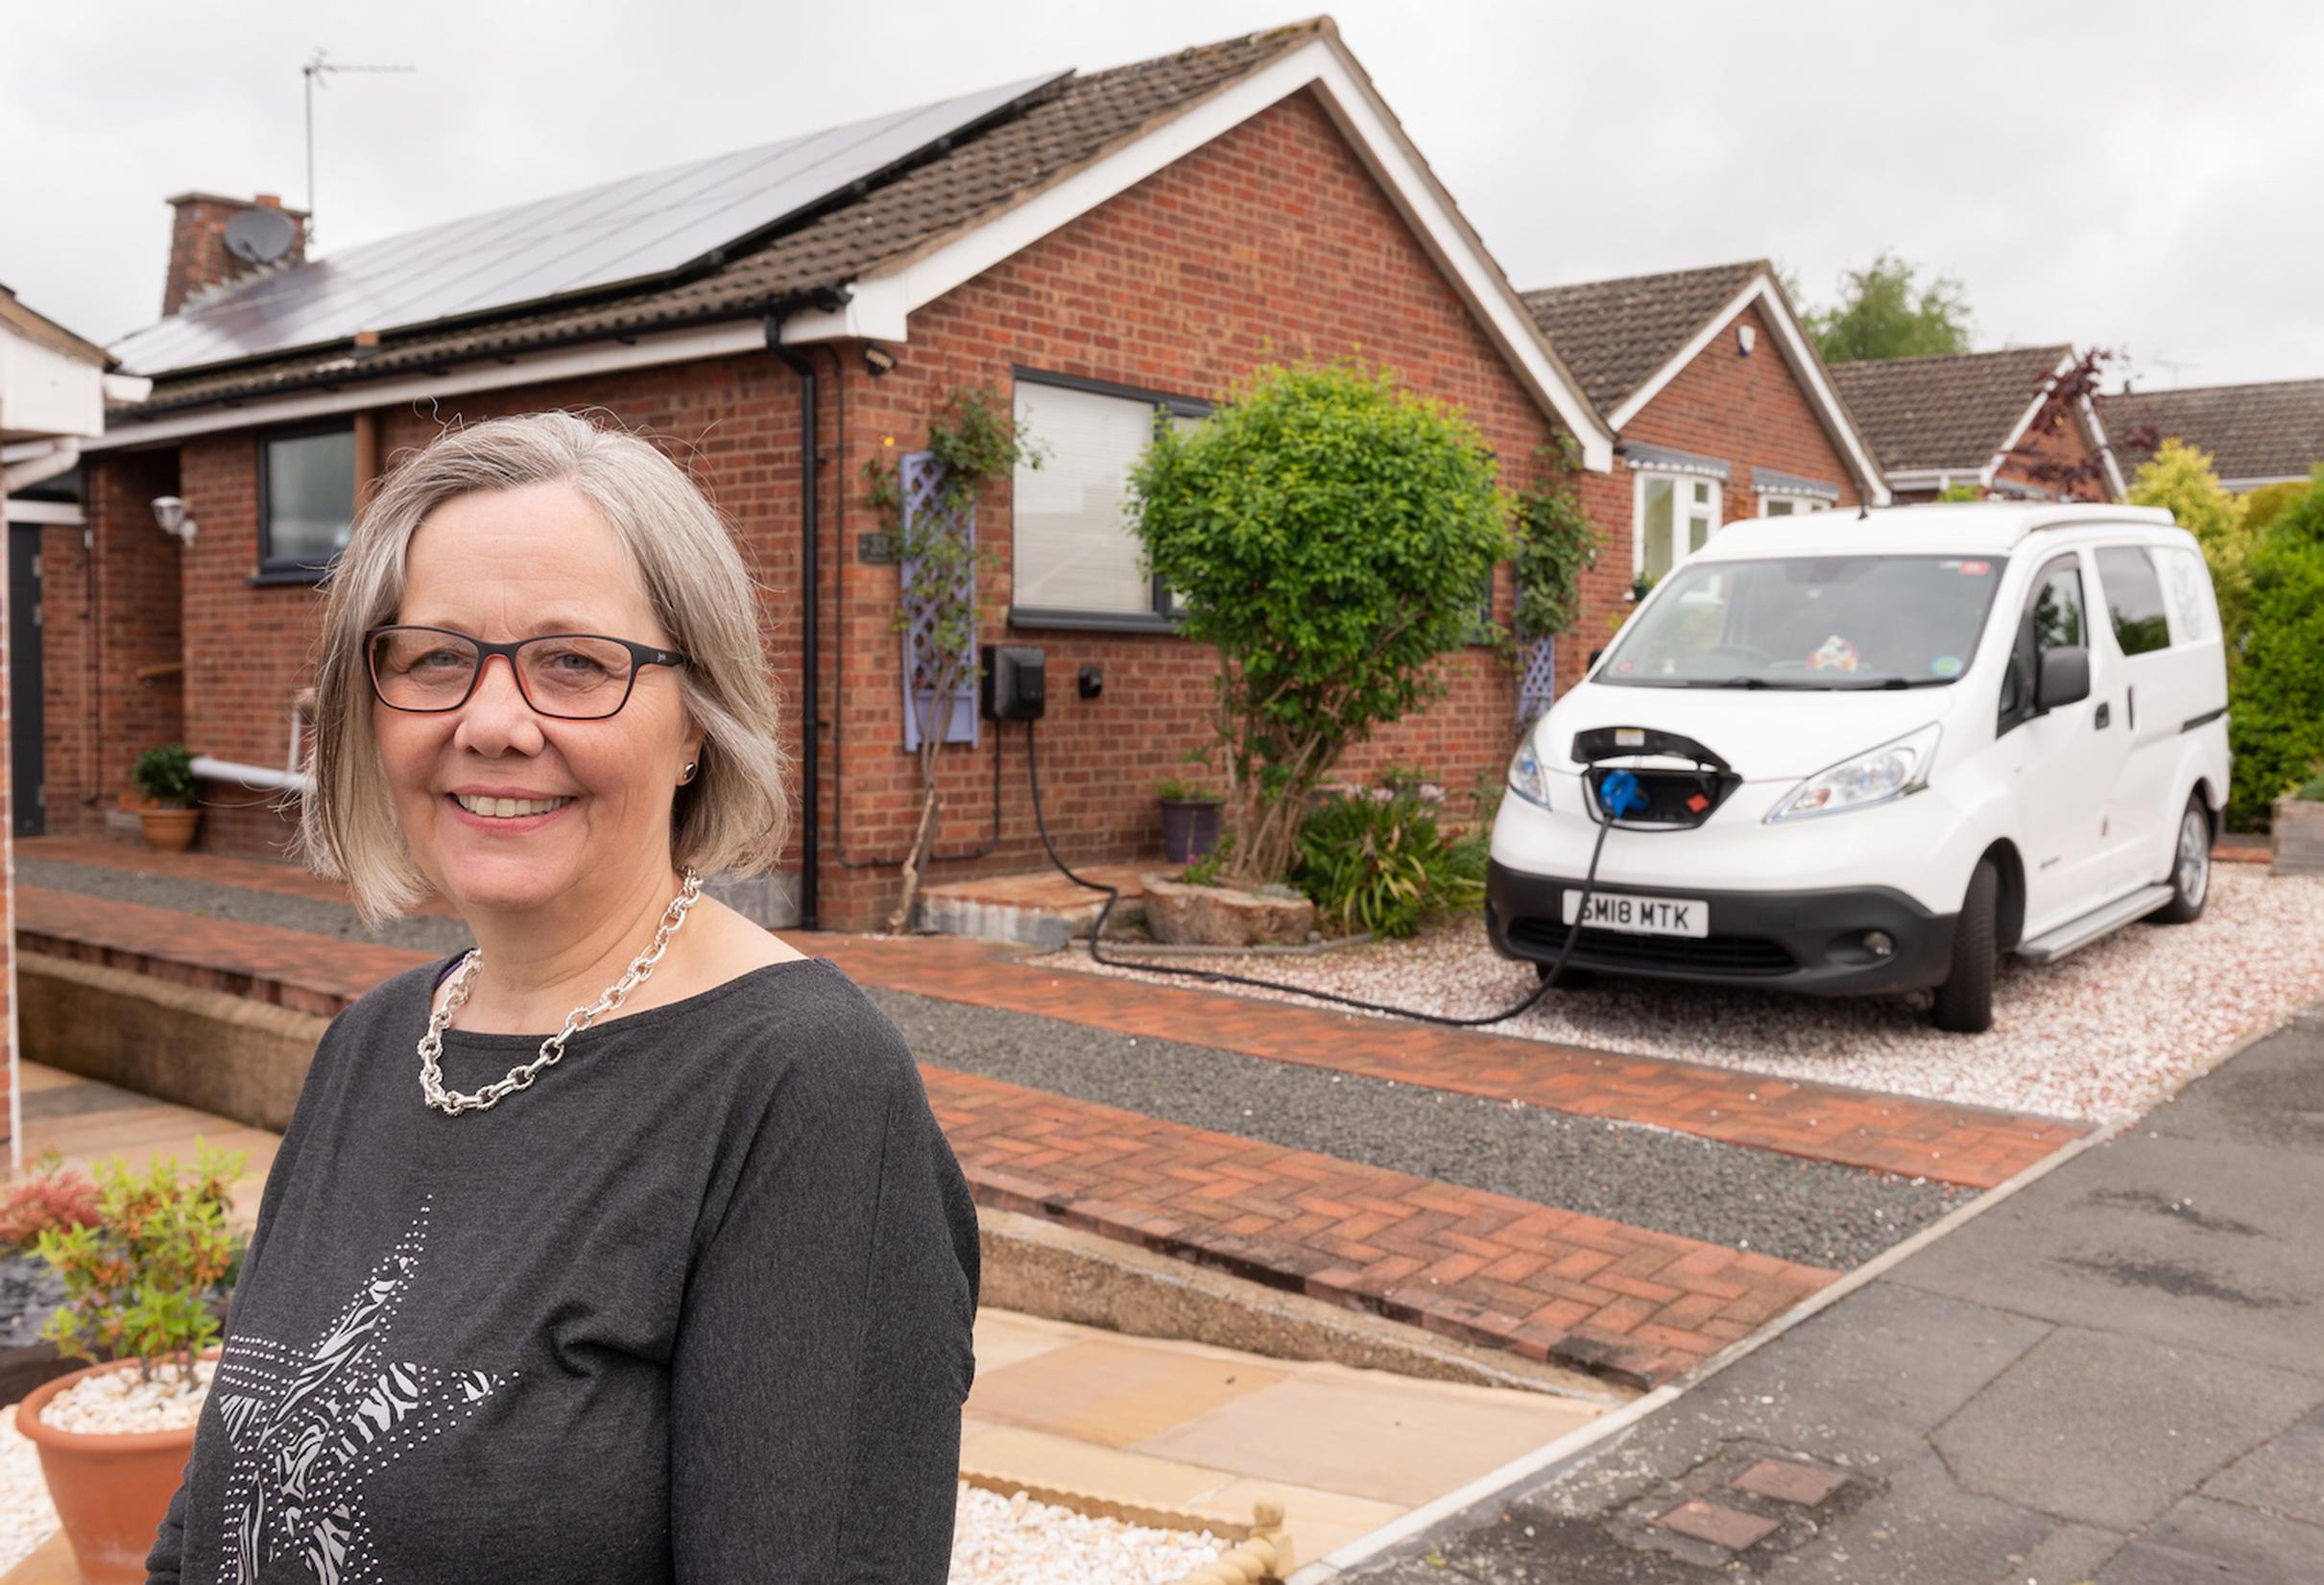 Marie Hubbard took part in Electric Nation, using her Nissan e-NV200 campervan in the project